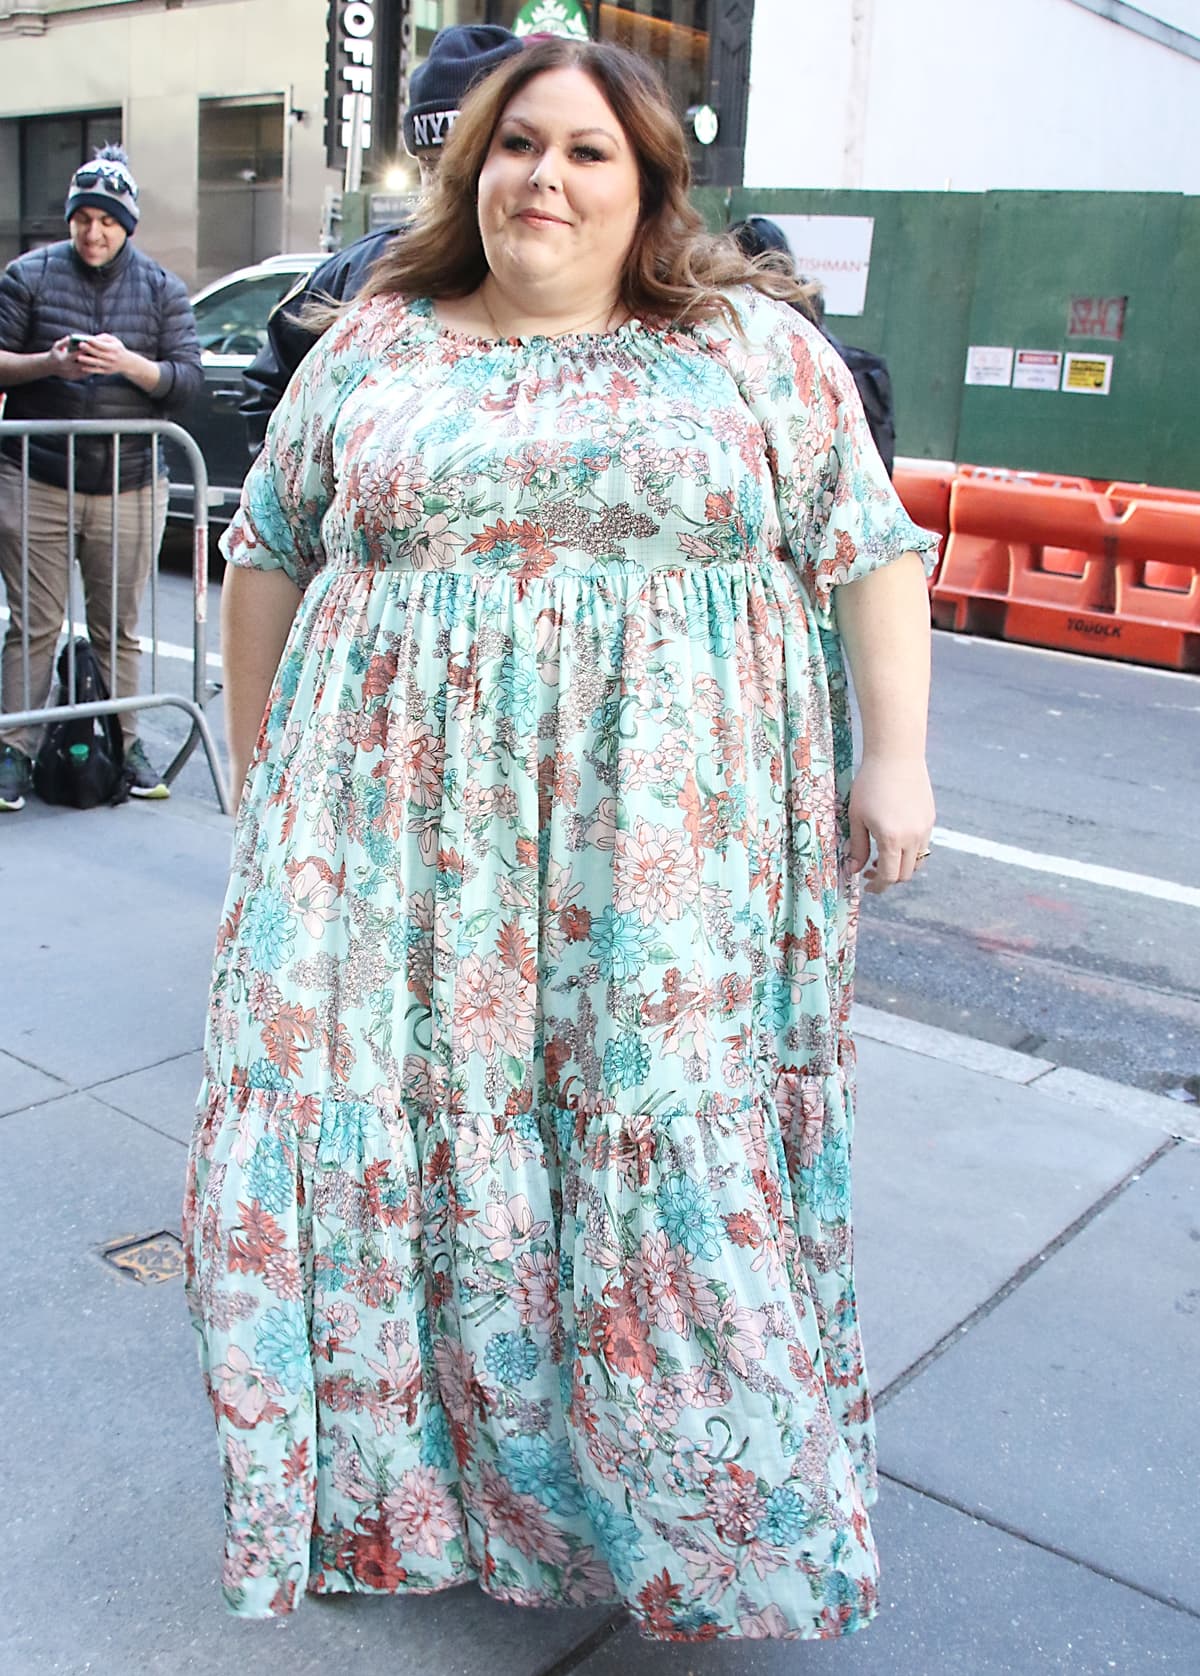 Chrissy Metz, in a floral maxi dress, arrives to promote her children's book on NBC's "Today" show